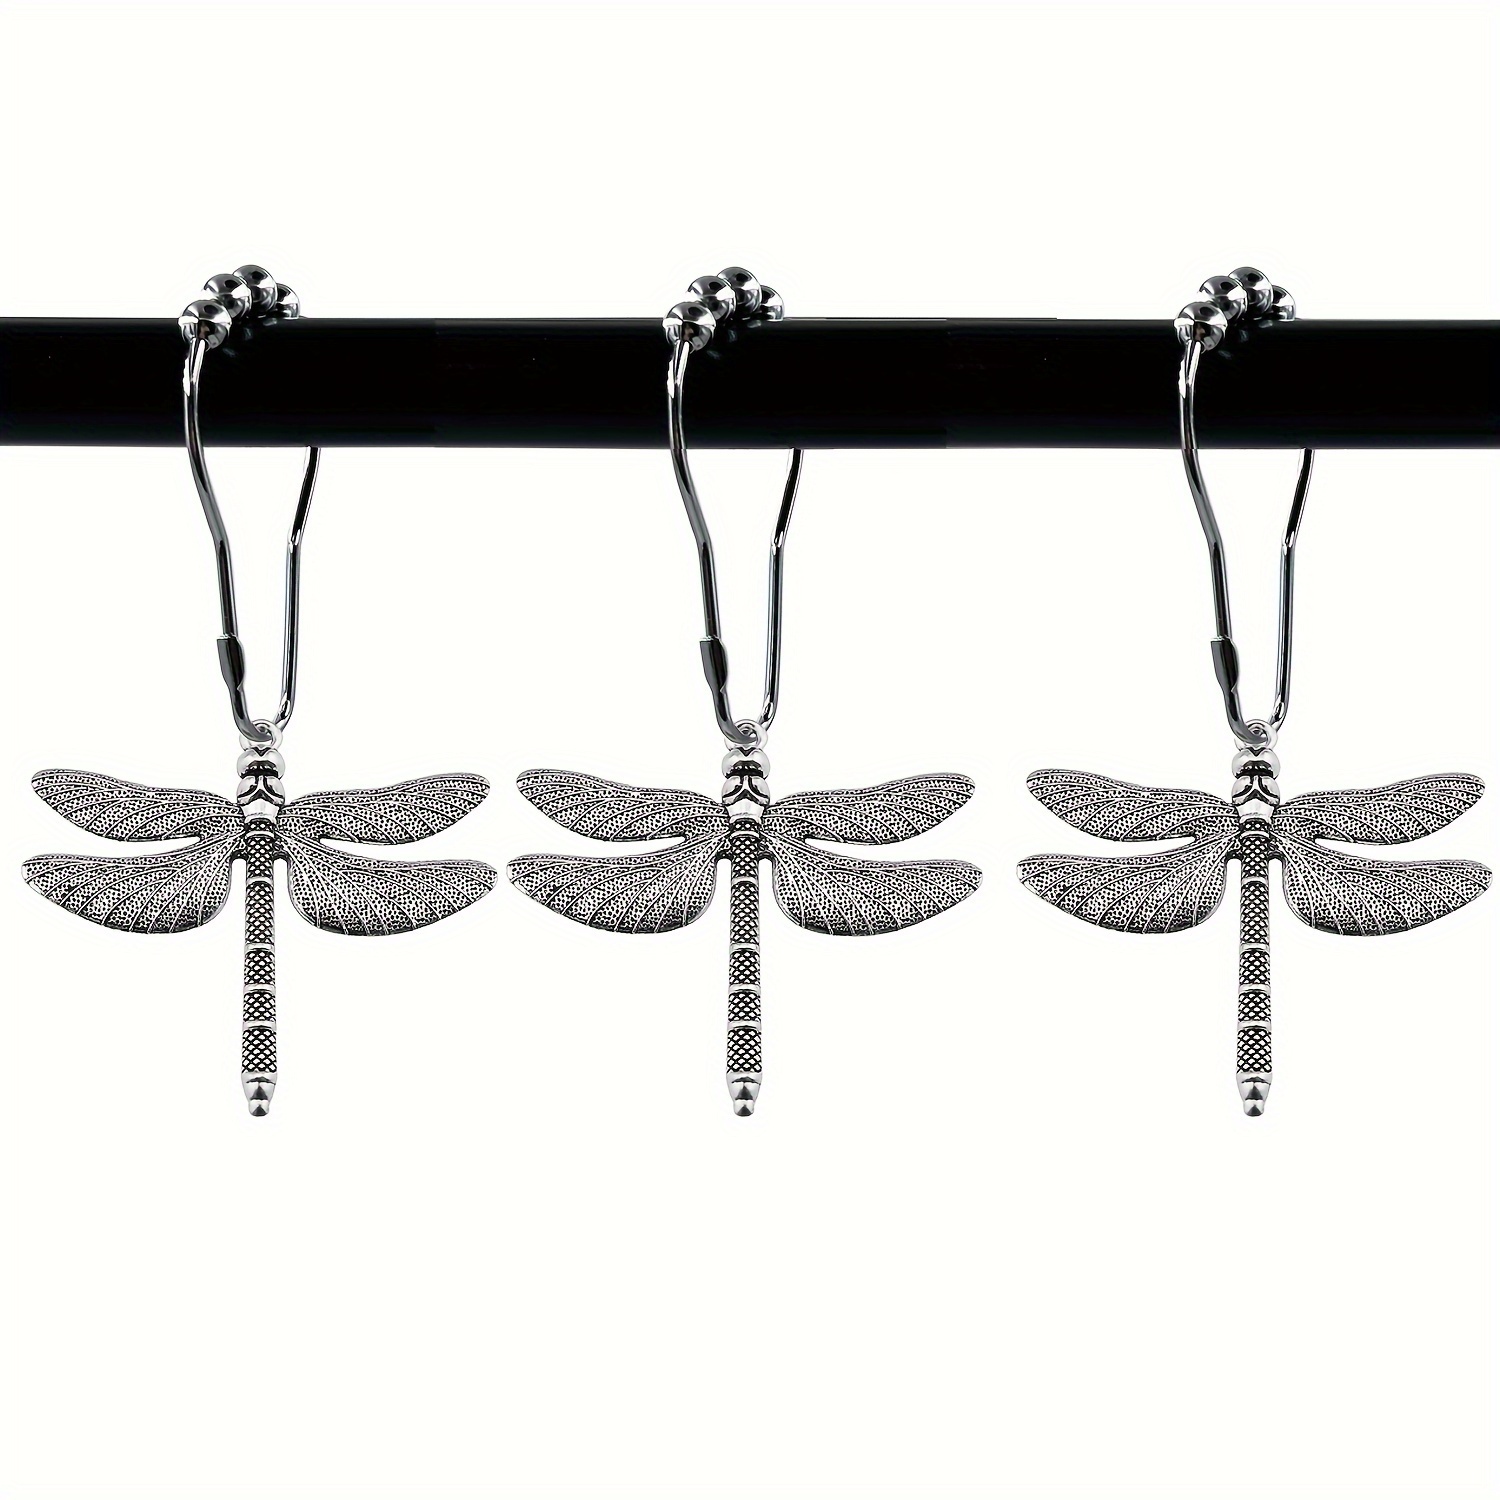 Dragonfly Hooks, Dragonfly Picture Hook, Decorative Jewelry Hook